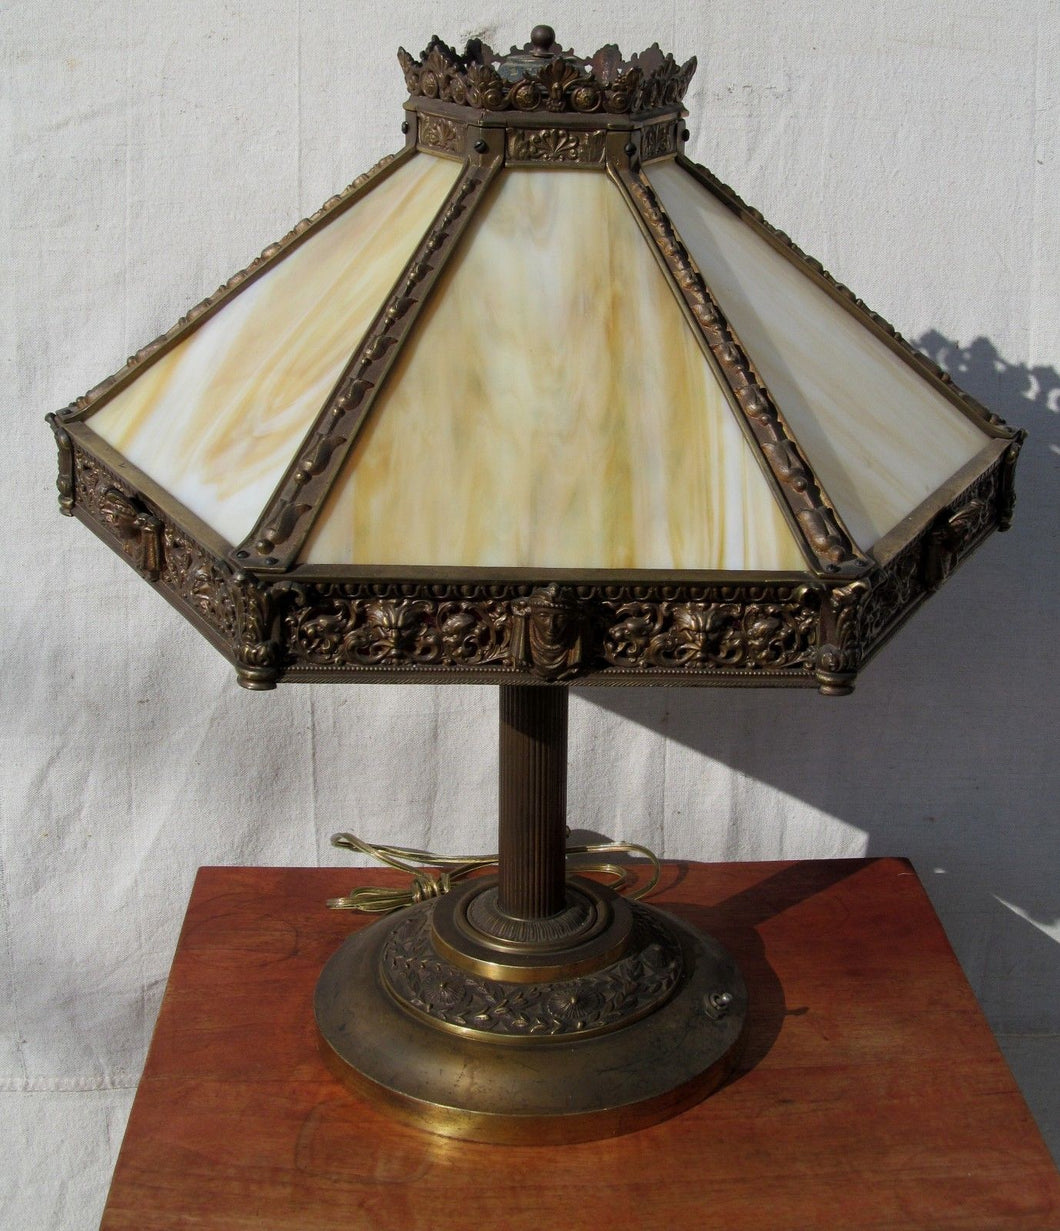 VICTORIAN EGYPTIAN REVIVAL LAMP WITH FINELY CASTED BRONZE & 12 SLAG PANEL SHADE